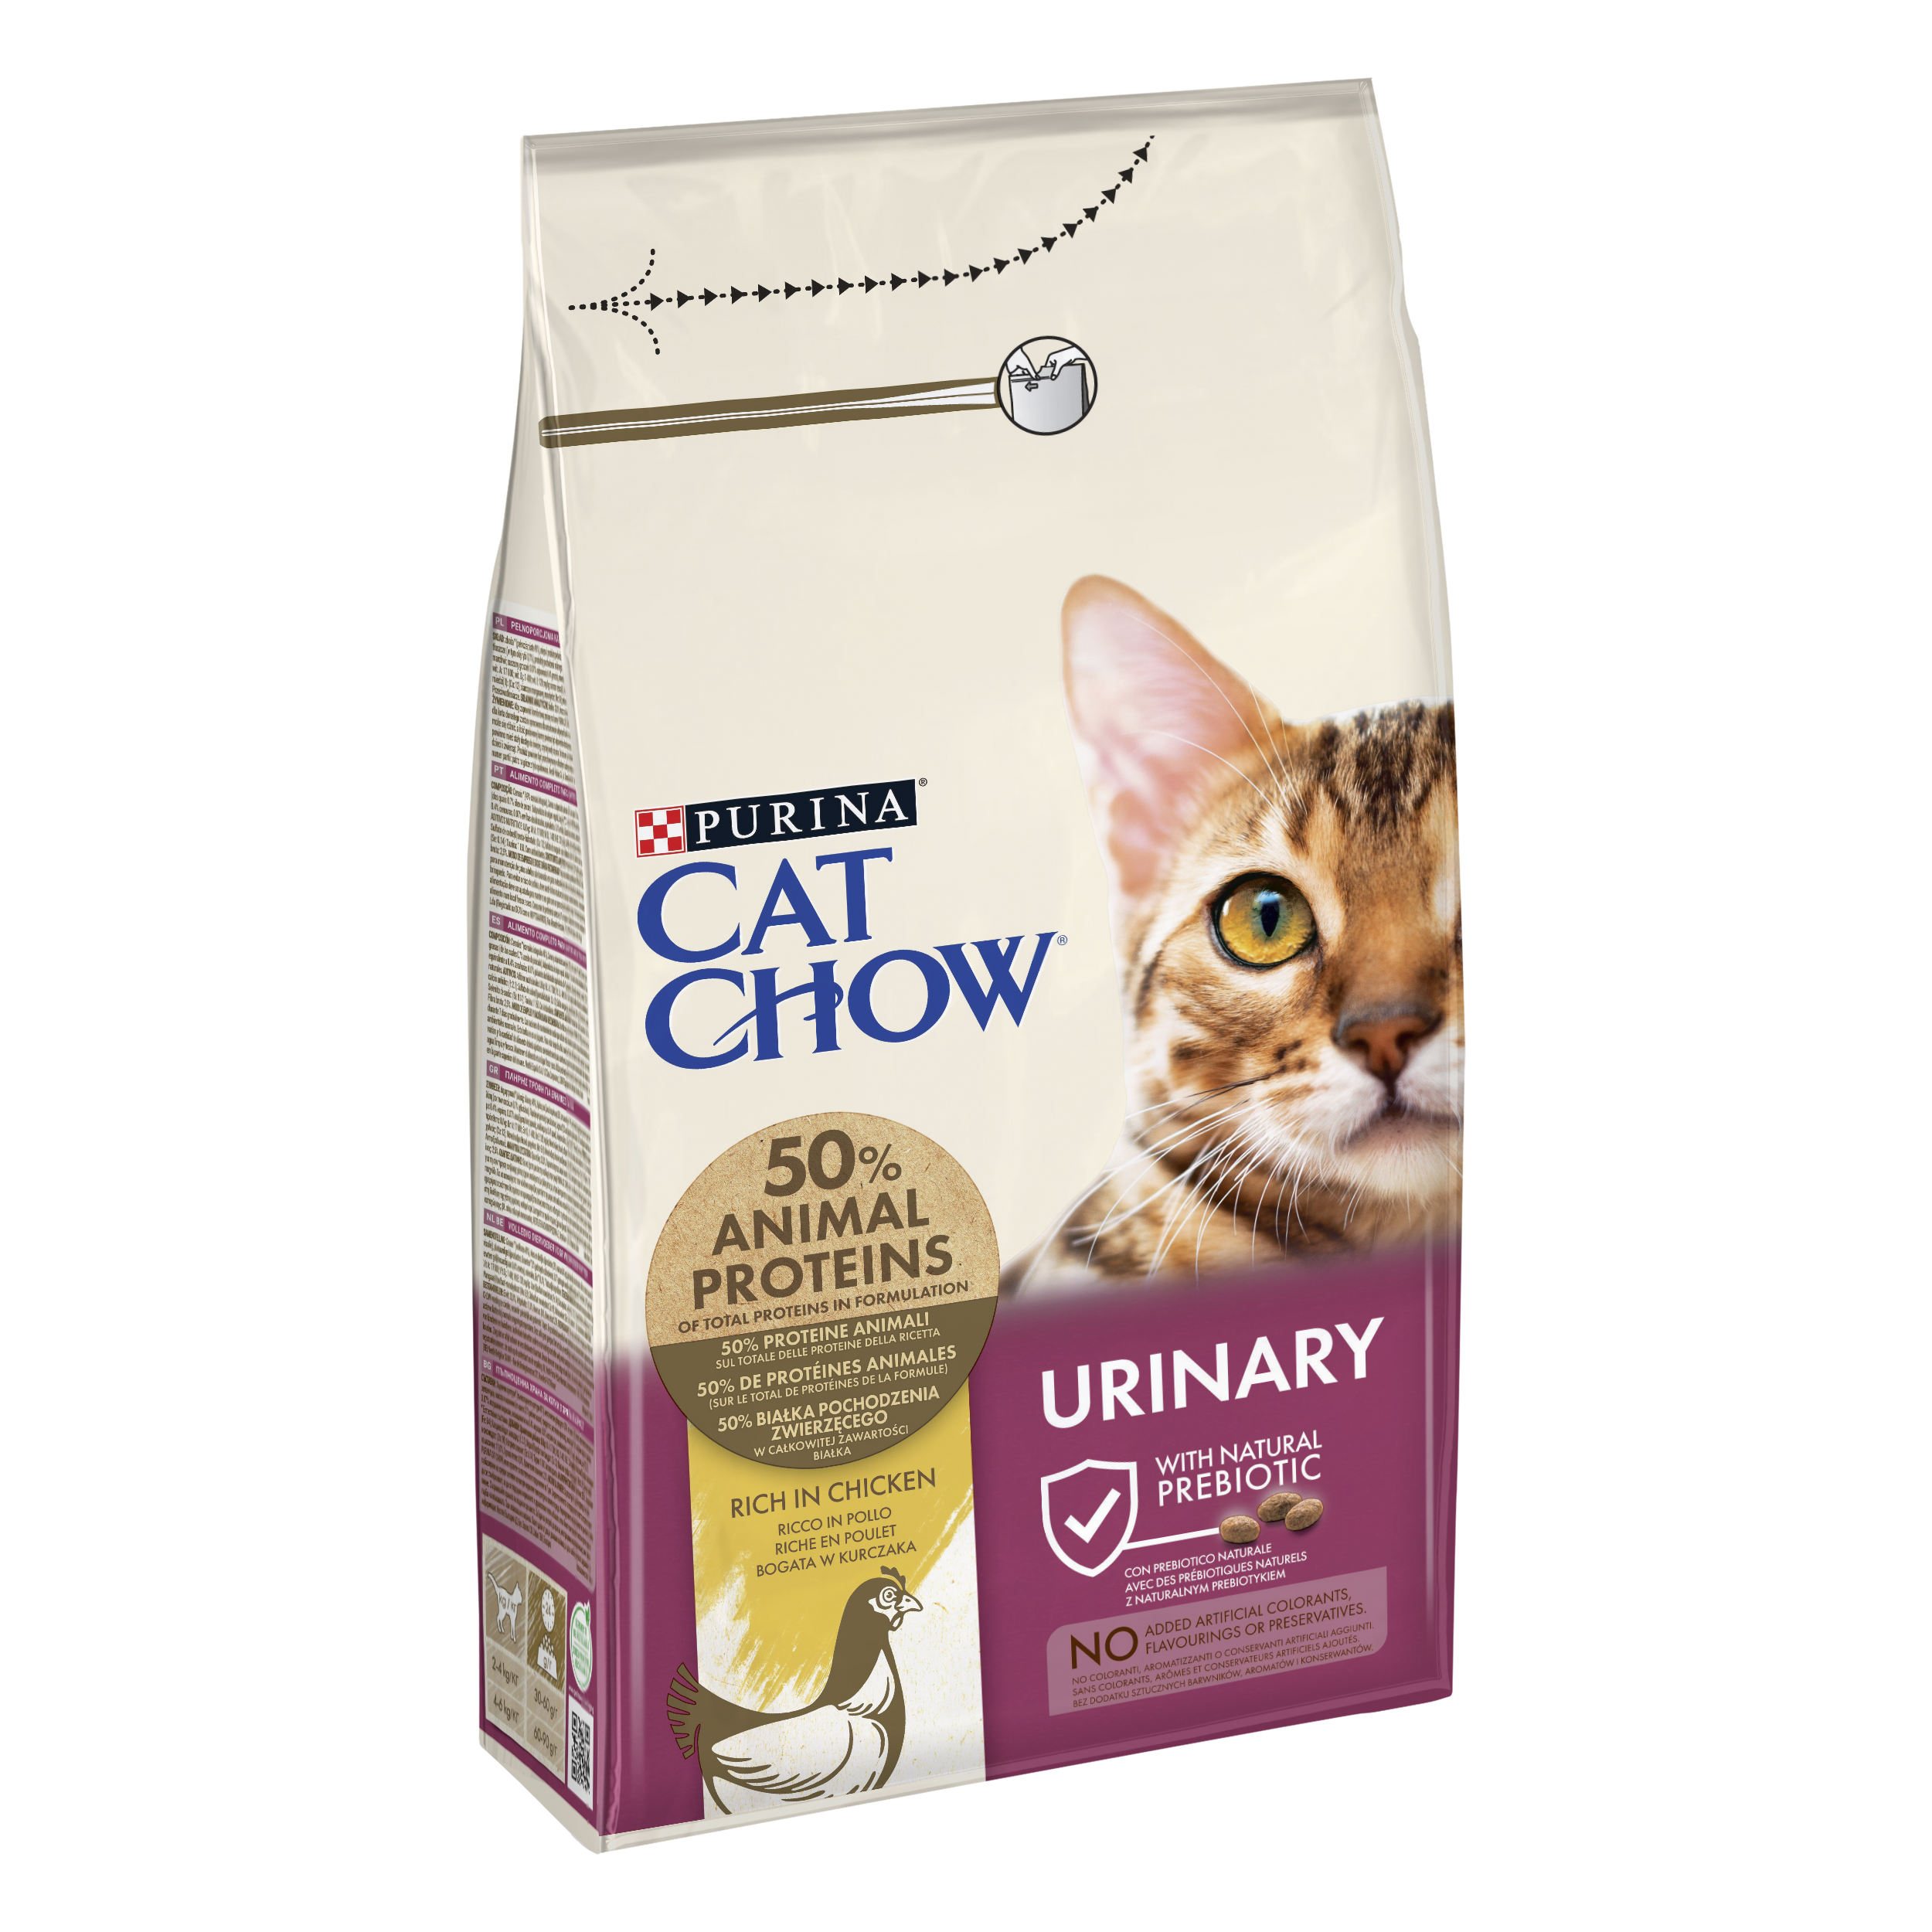 Cat Chow Urinary Tract Health Cat Chow